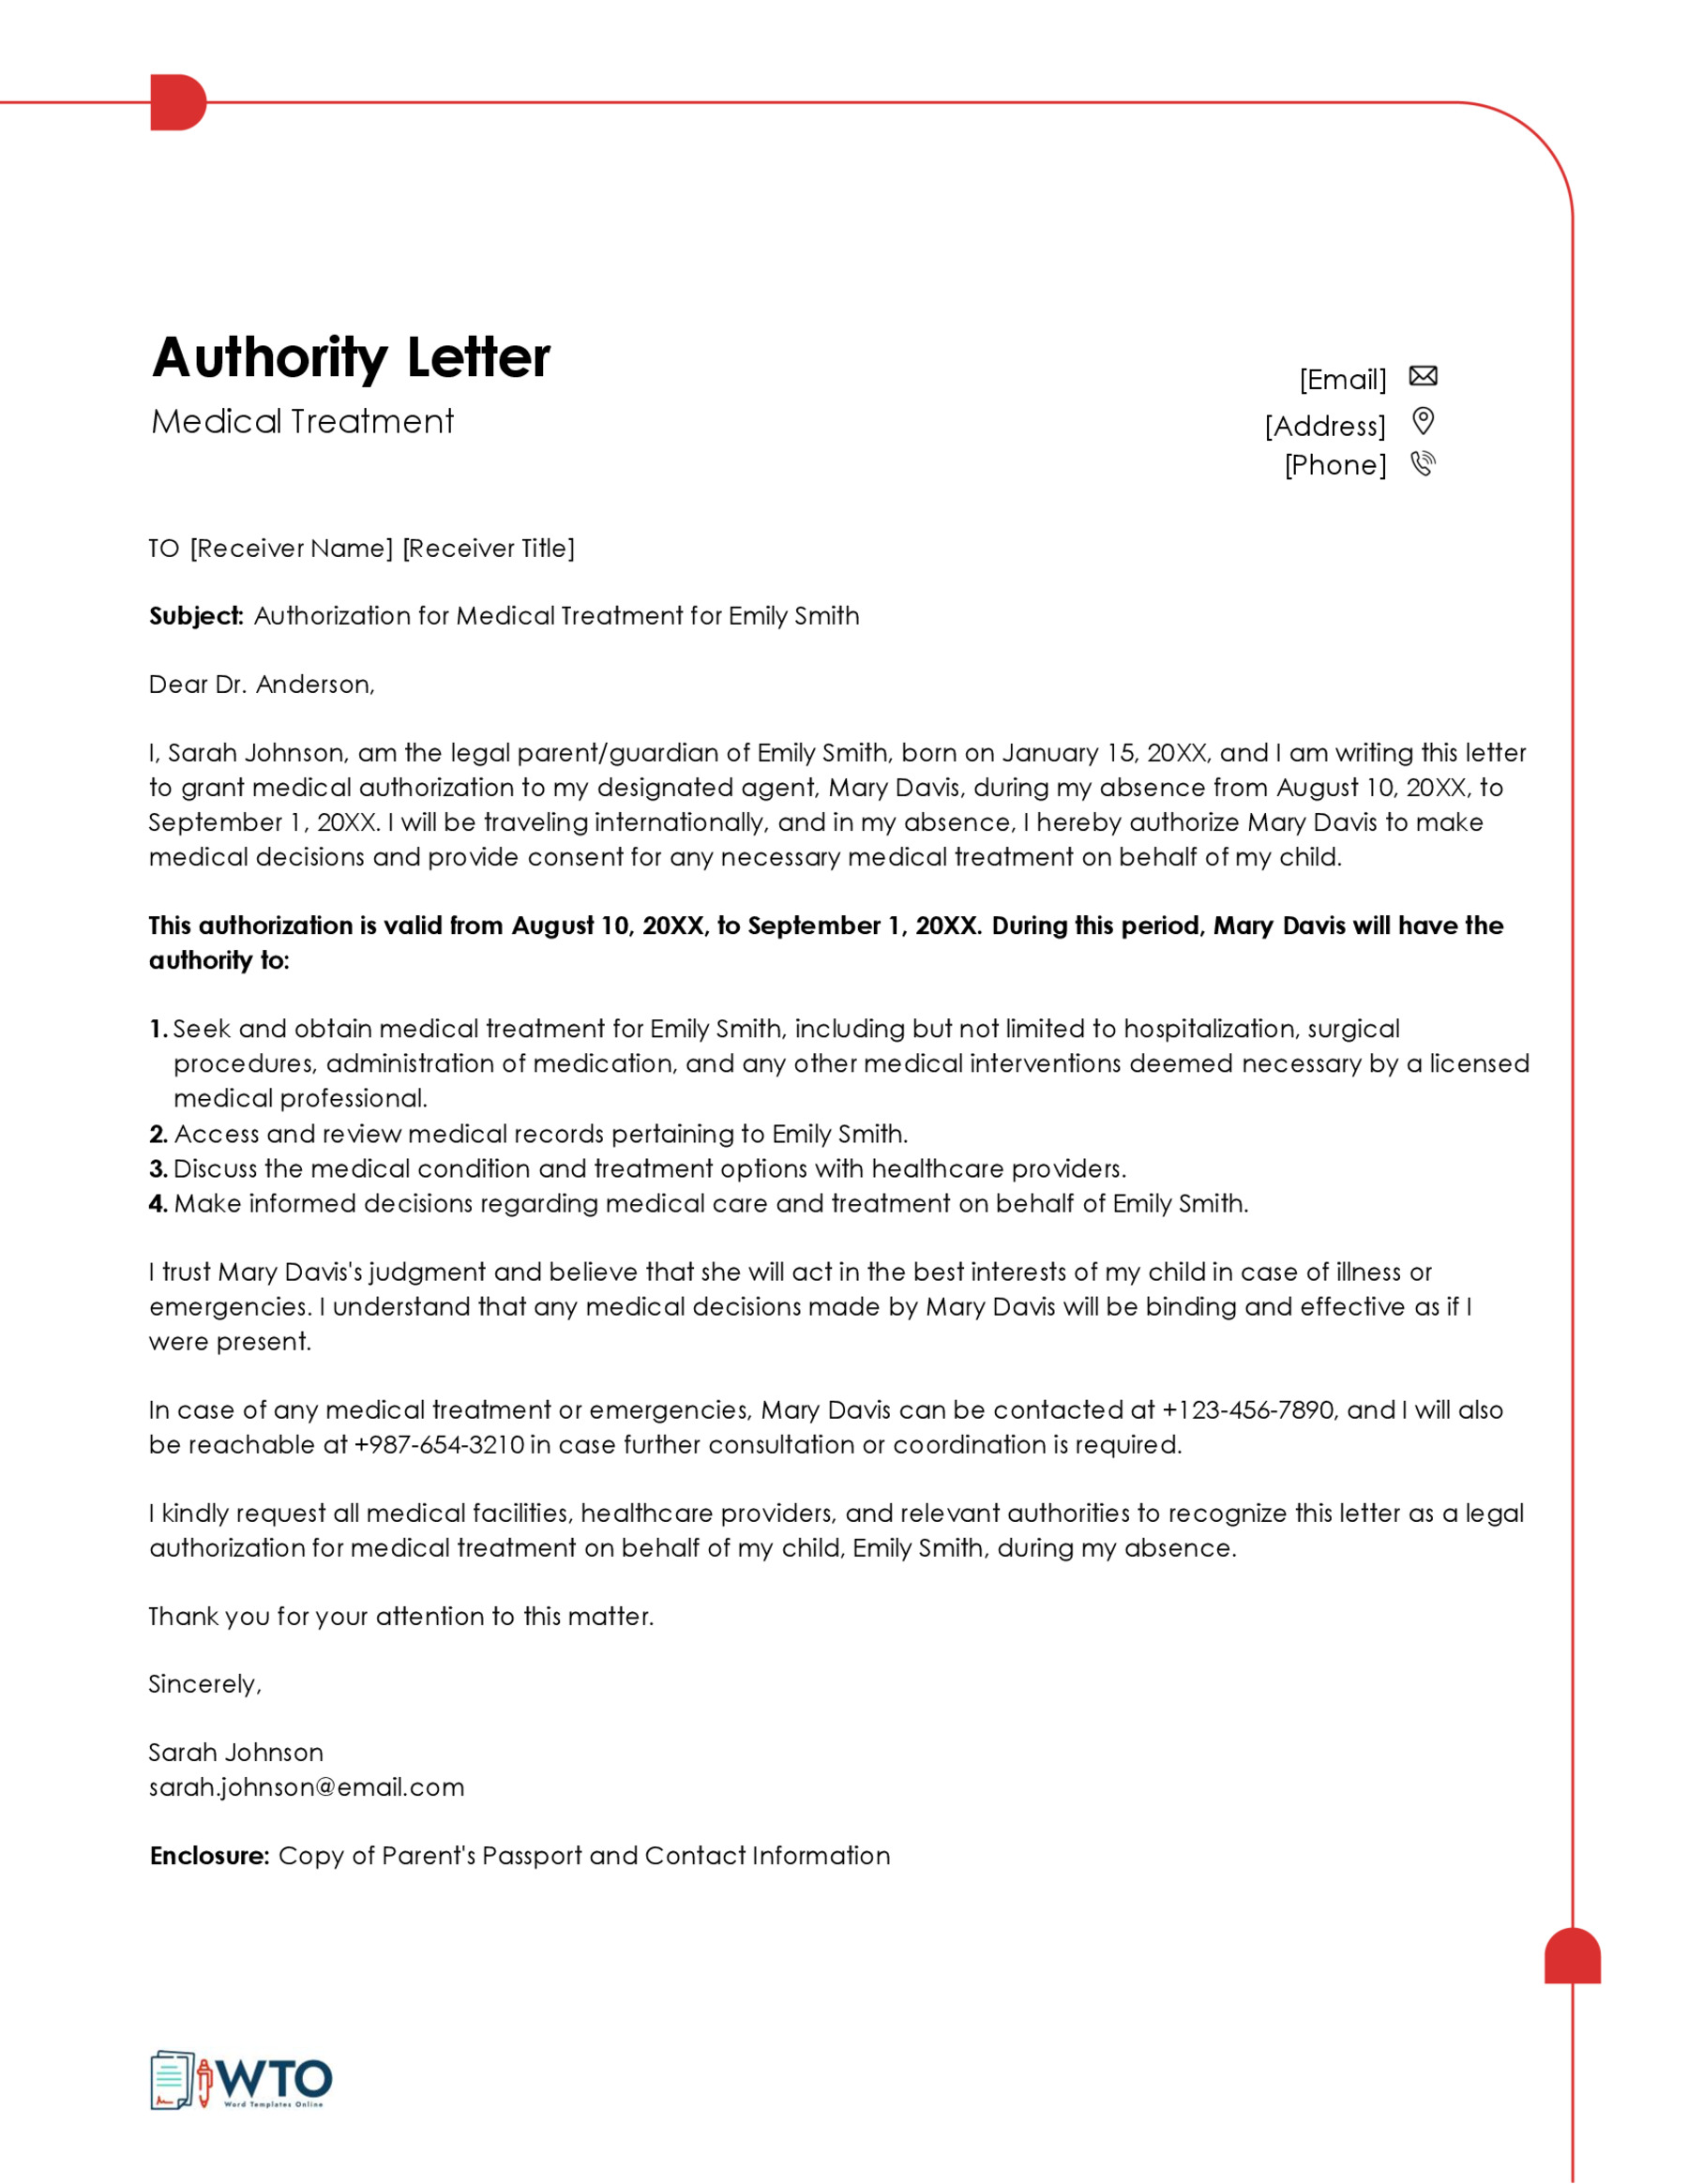 Sample Permission Medical Authorization Letter- Free download